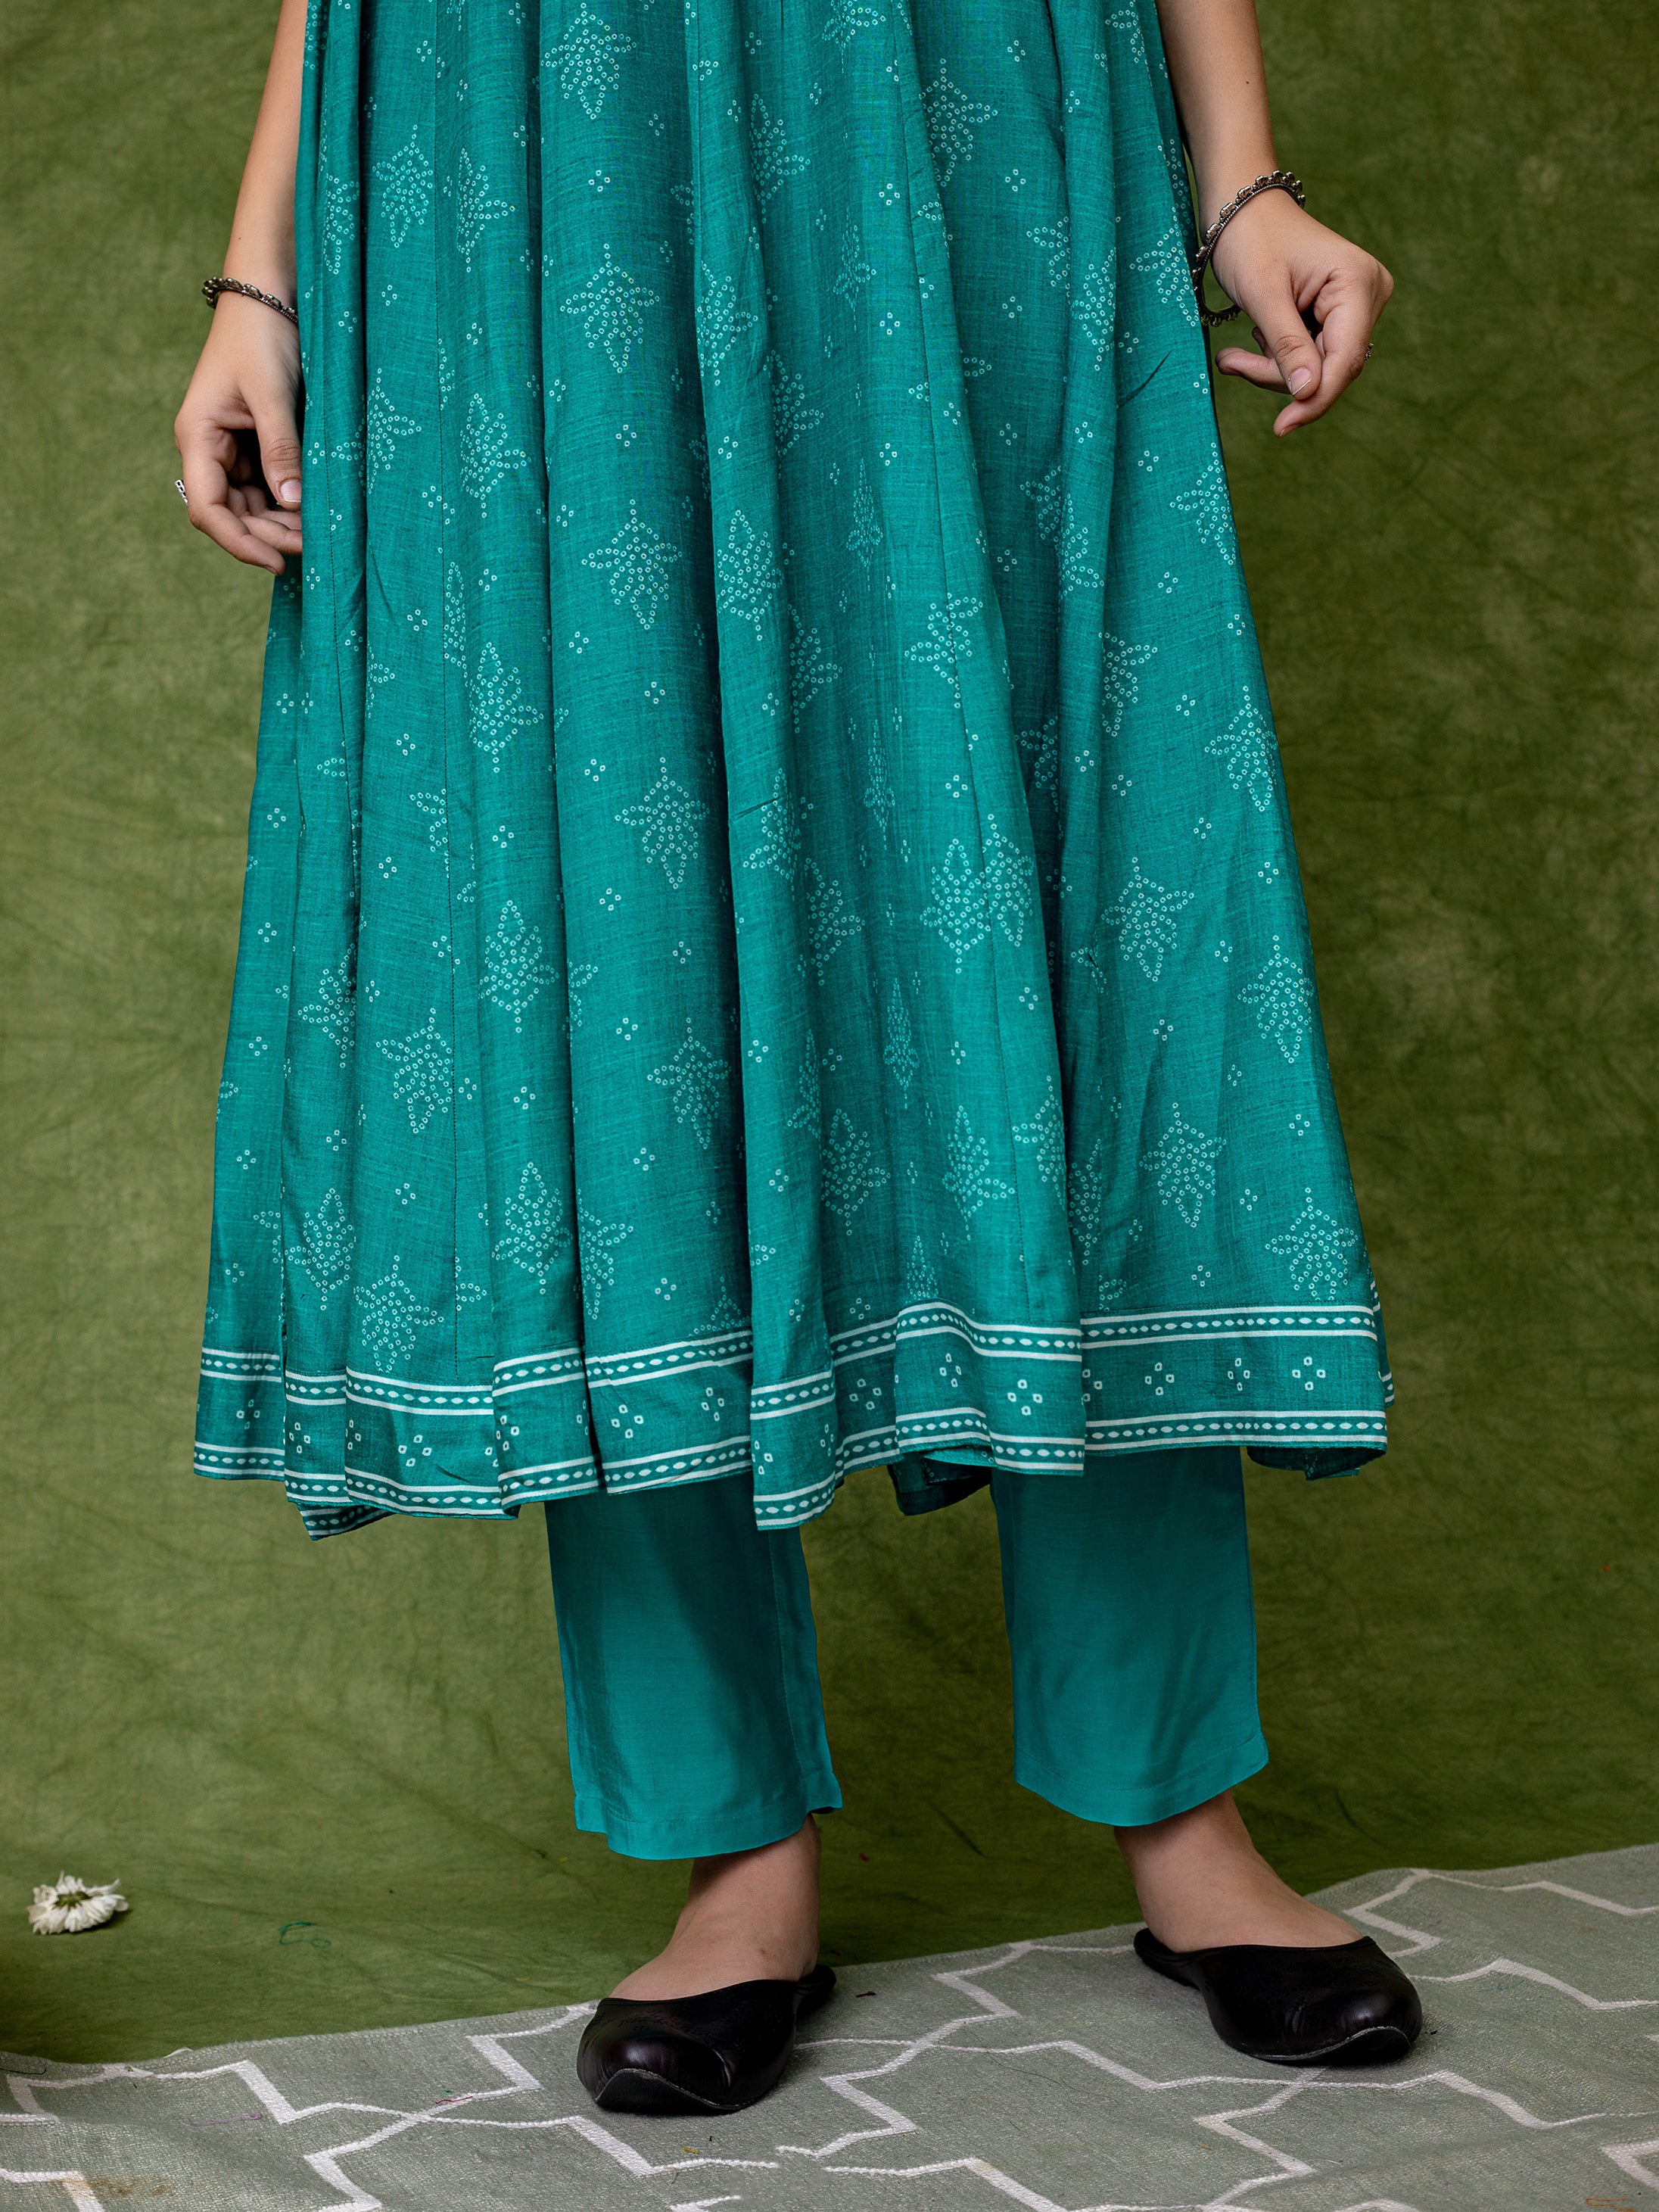 capture-timeless-charm-with-our-teal-blue-kalidaar-kurta-featuring-intricate-bandhani-buta-print-effortlessly-elegant-for-a-stunning-statement